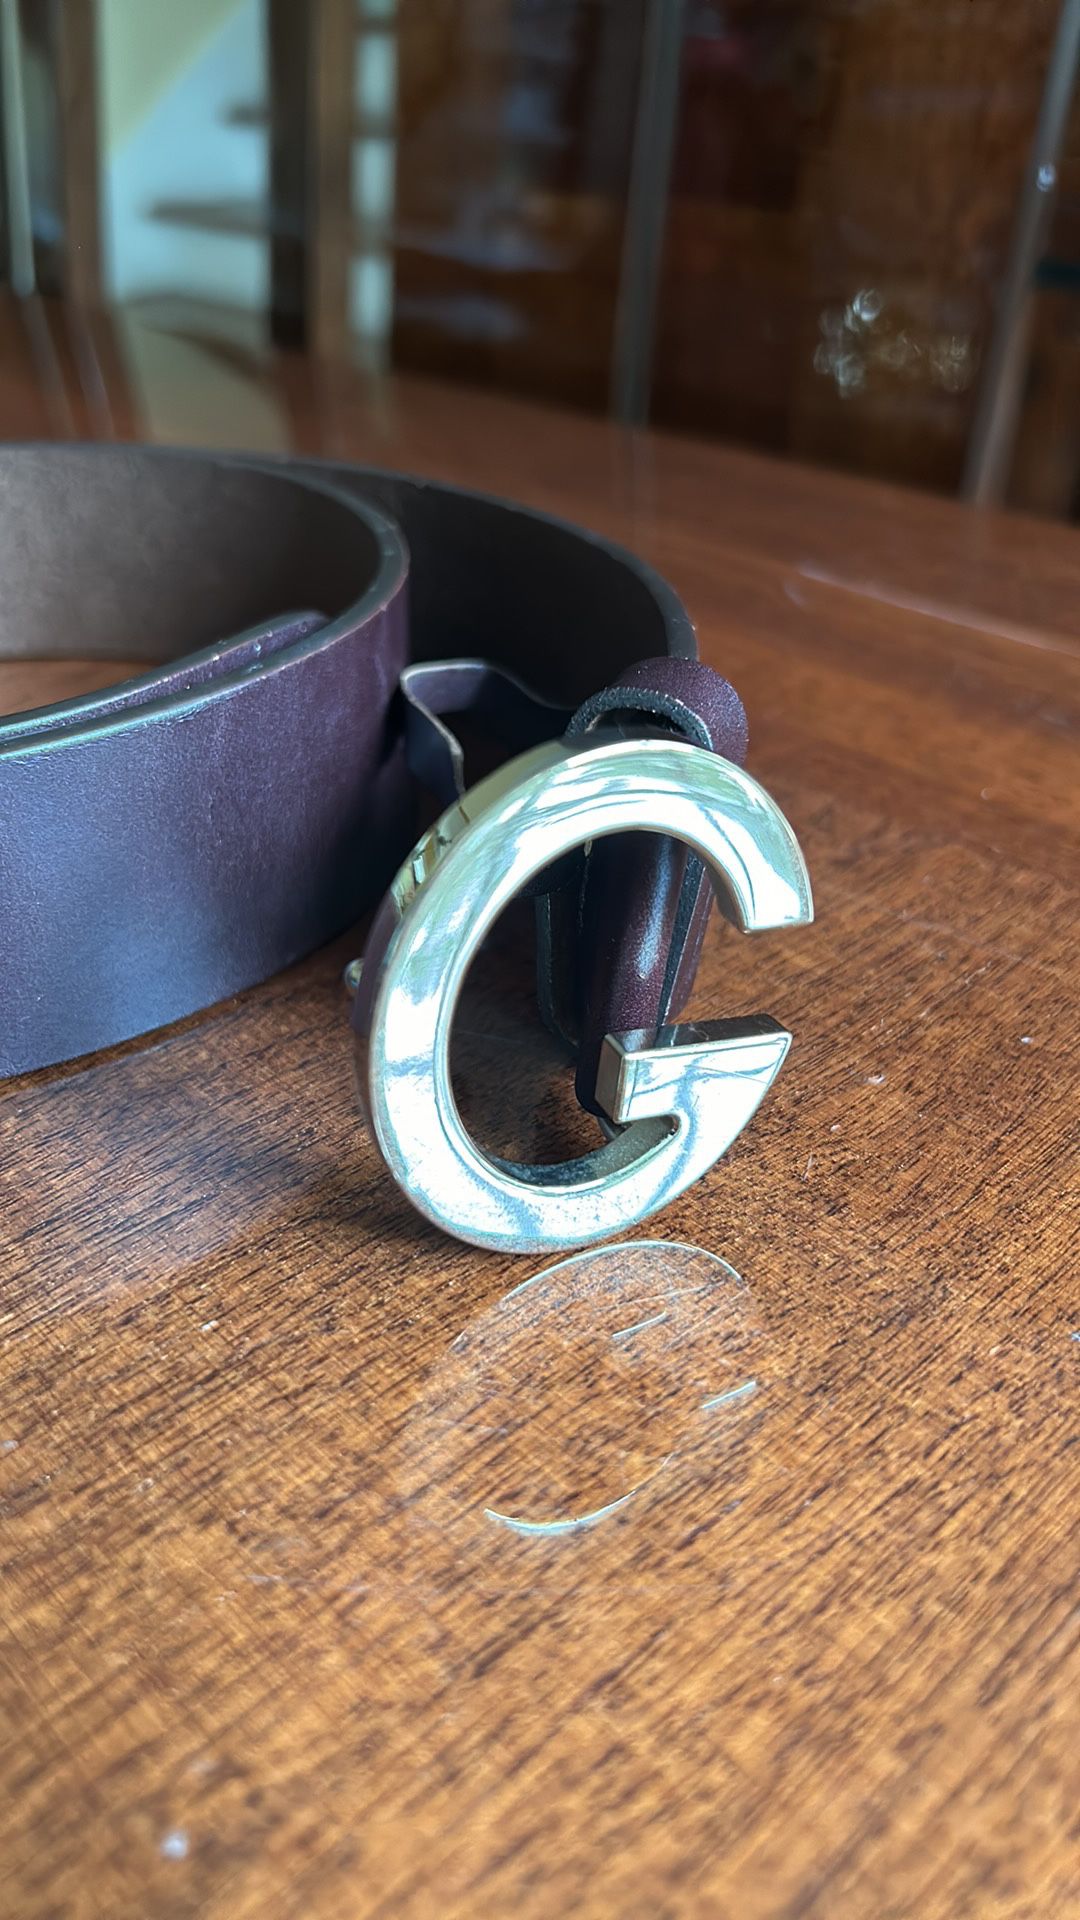 Gucci Brown Leather Belt And Buckle 38 1/2 Inches Long Nearly 2 Inches Wide Marked Gucci Made In Italy